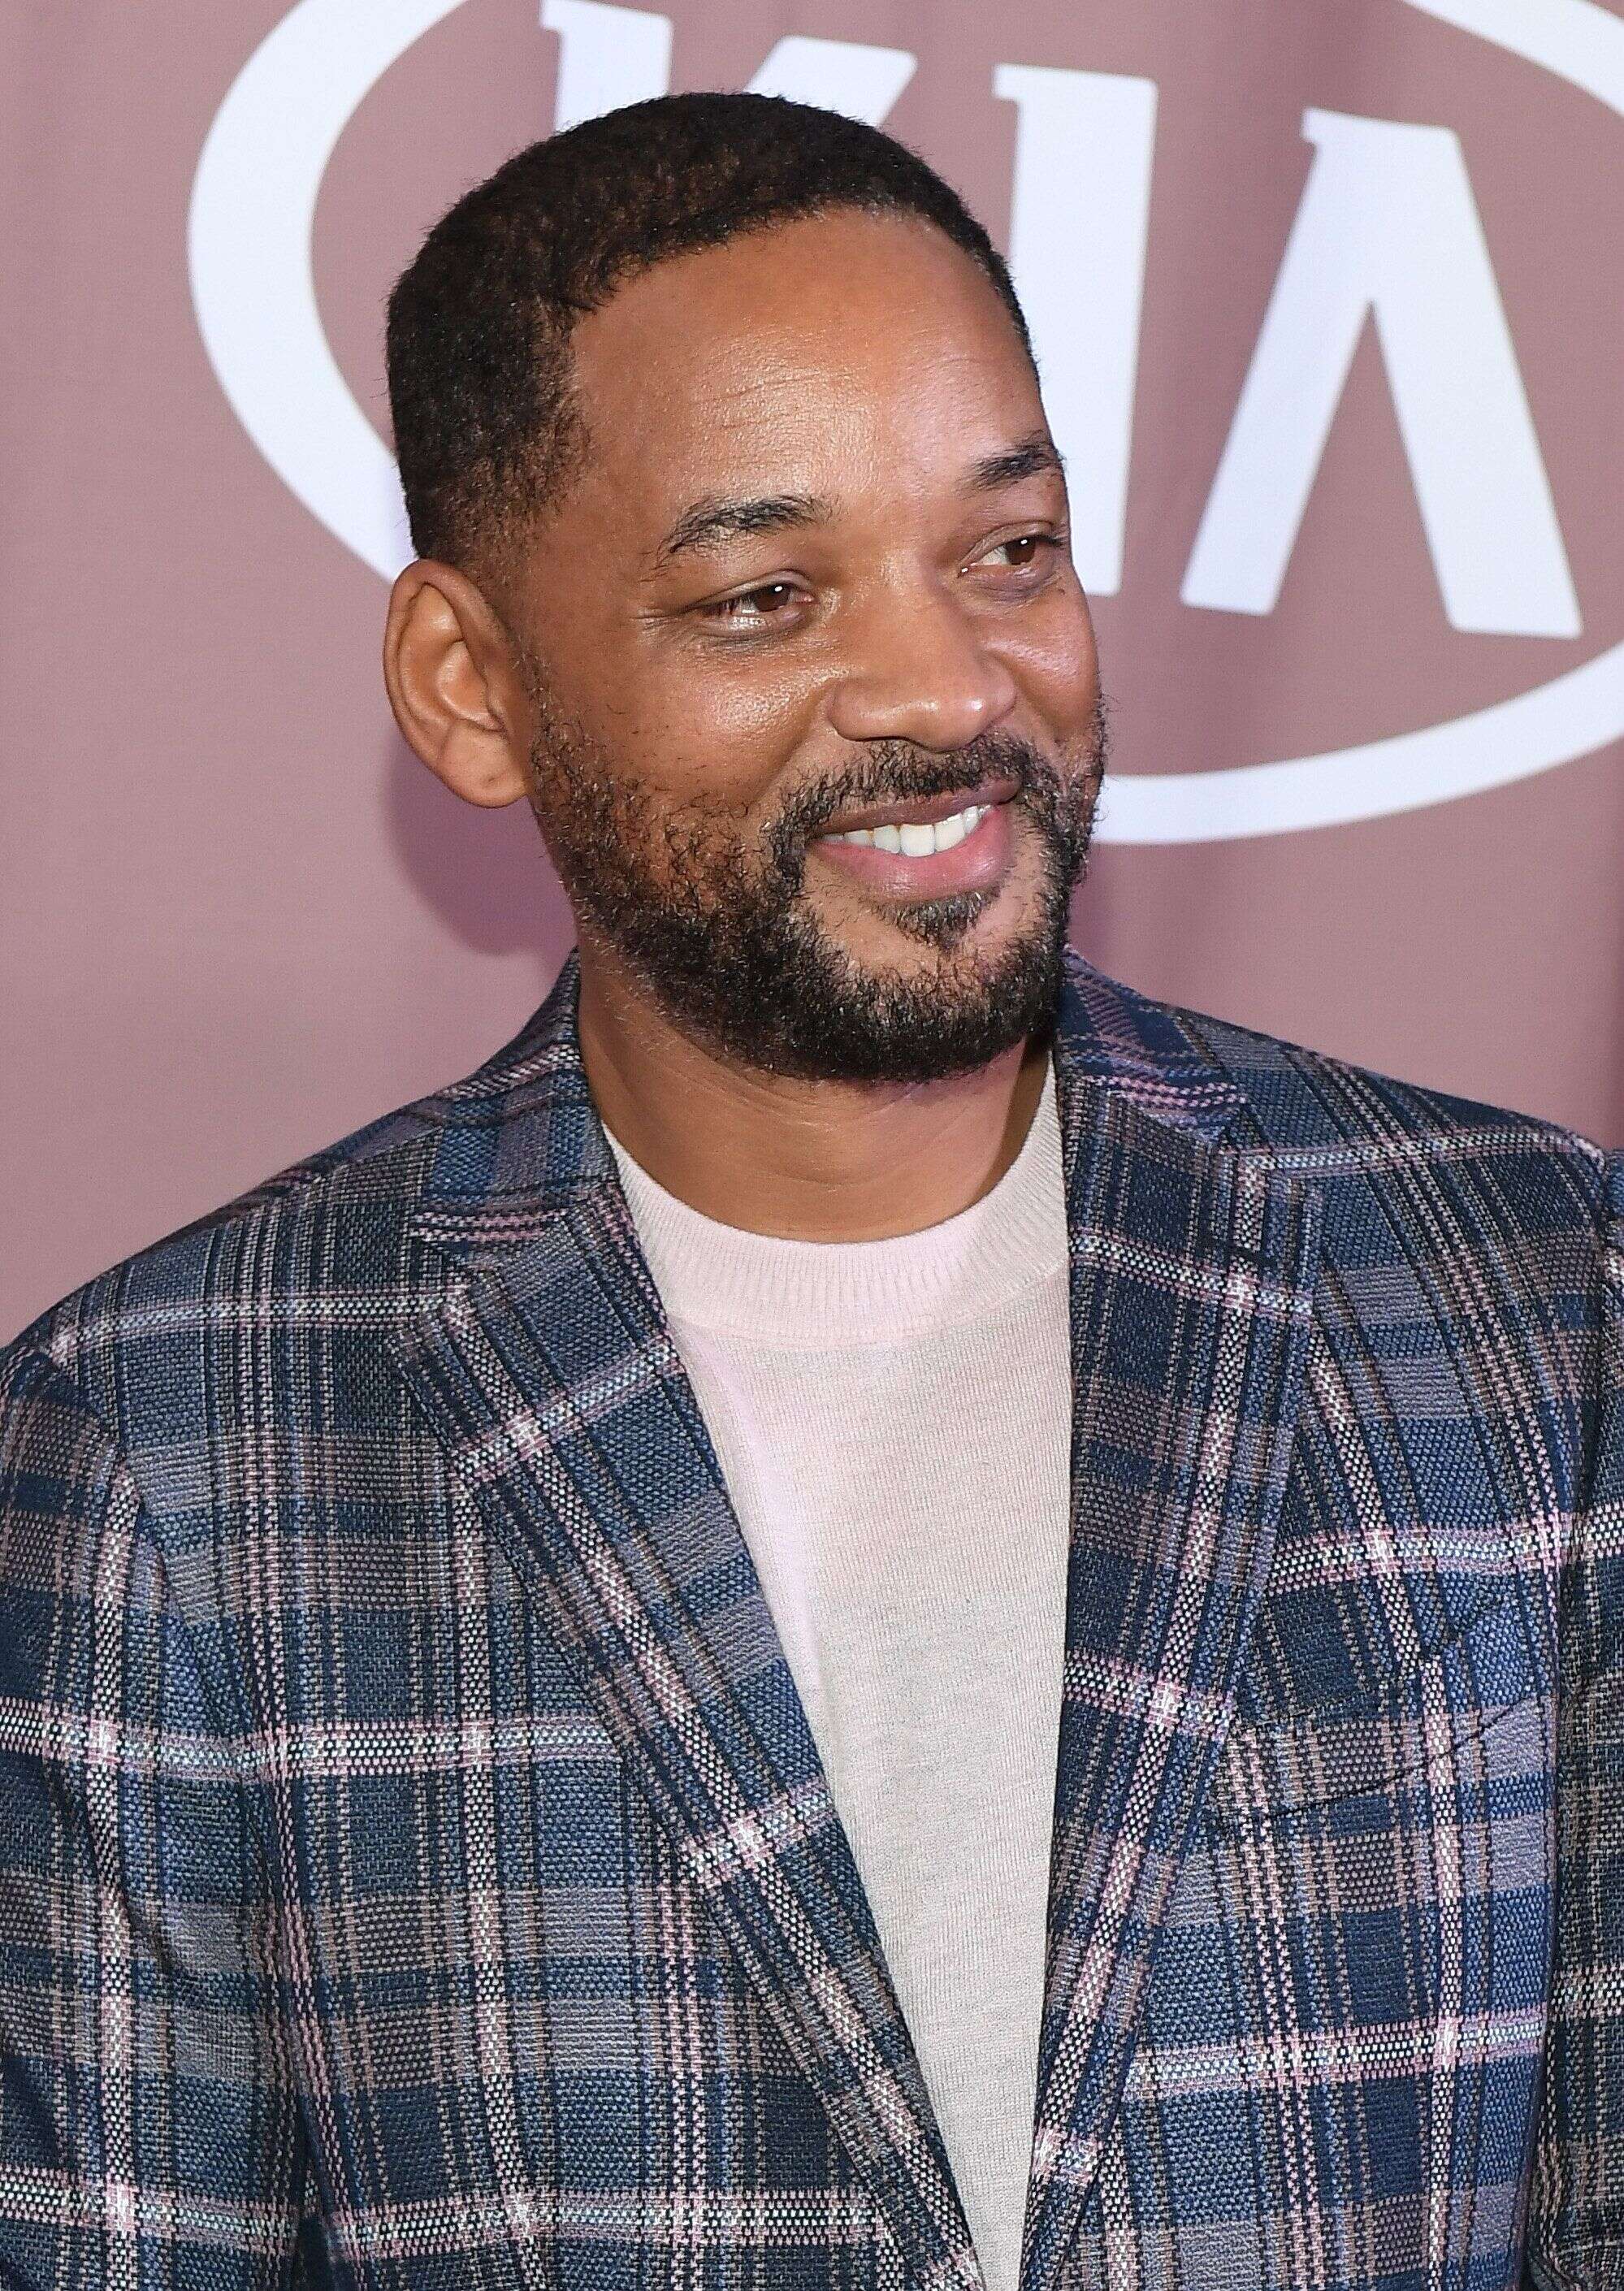 ATLANTA, GEORGIA - JANUARY 18:  Will Smith attends 2020 Salute to Greatness Awards Gala at Hyatt Regency Atlanta on January 18, 2020 in Atlanta, Georgia. (Photo by Paras Griffin/Getty Images)